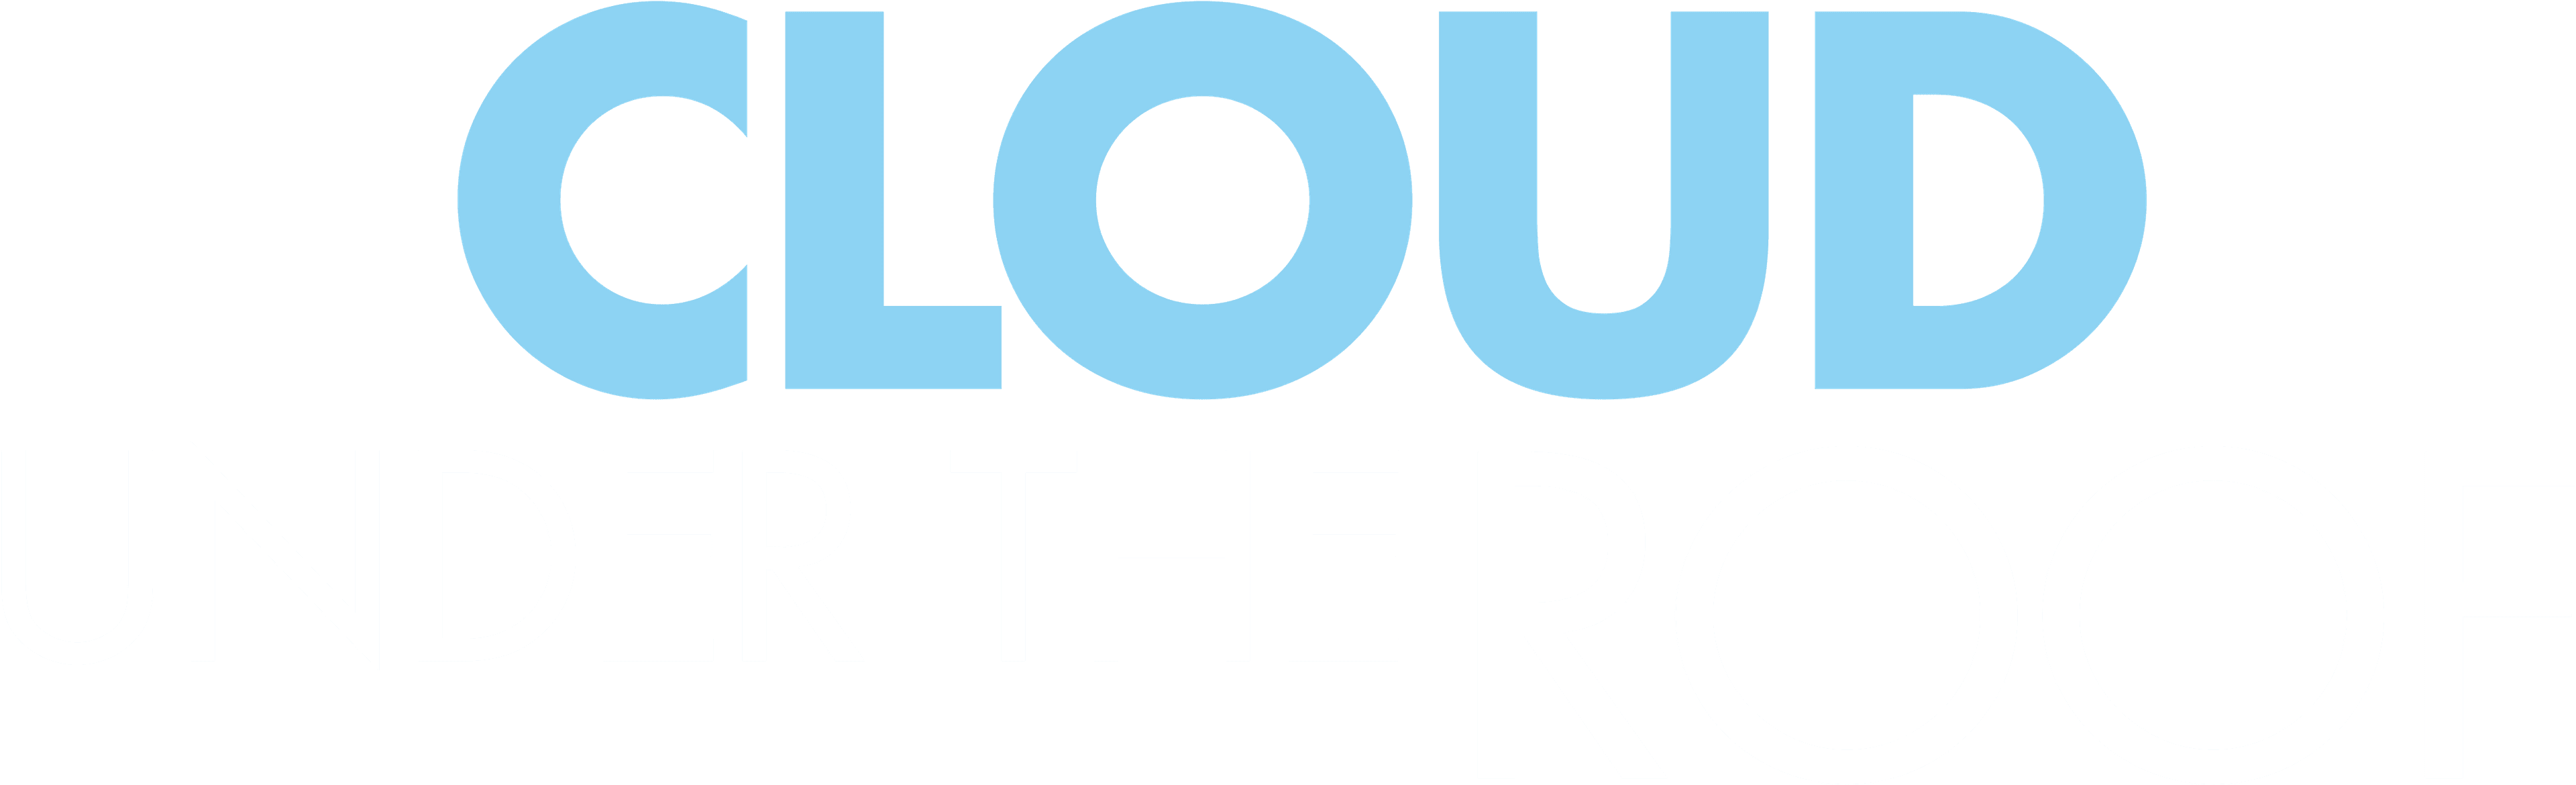 Cloud Under the Roof logo